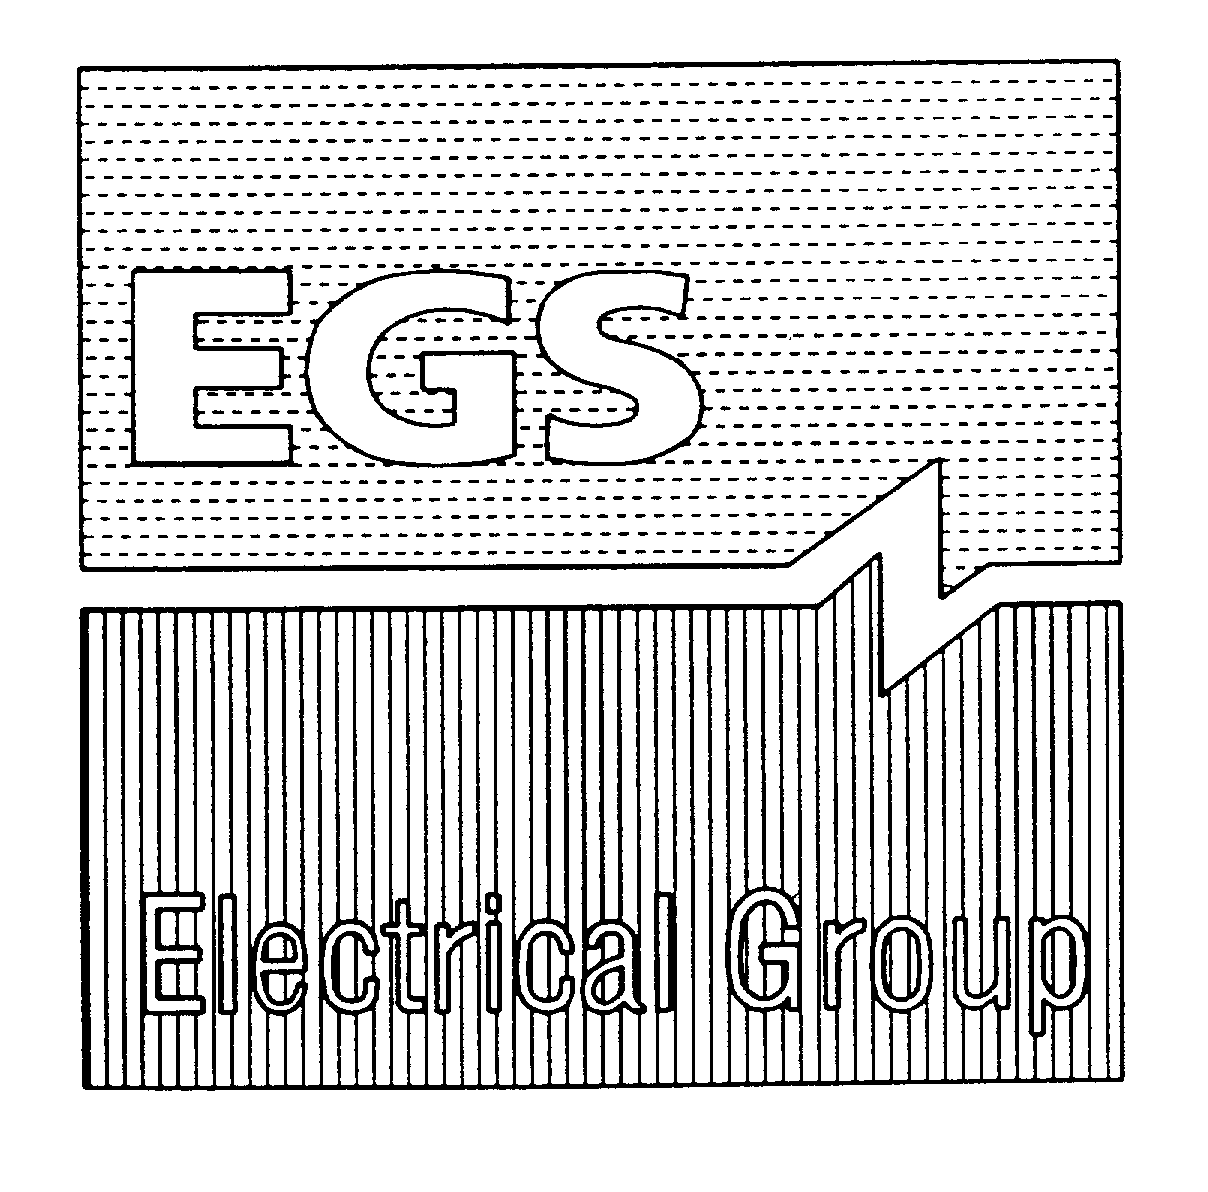  EGS ELECTRICAL GROUP